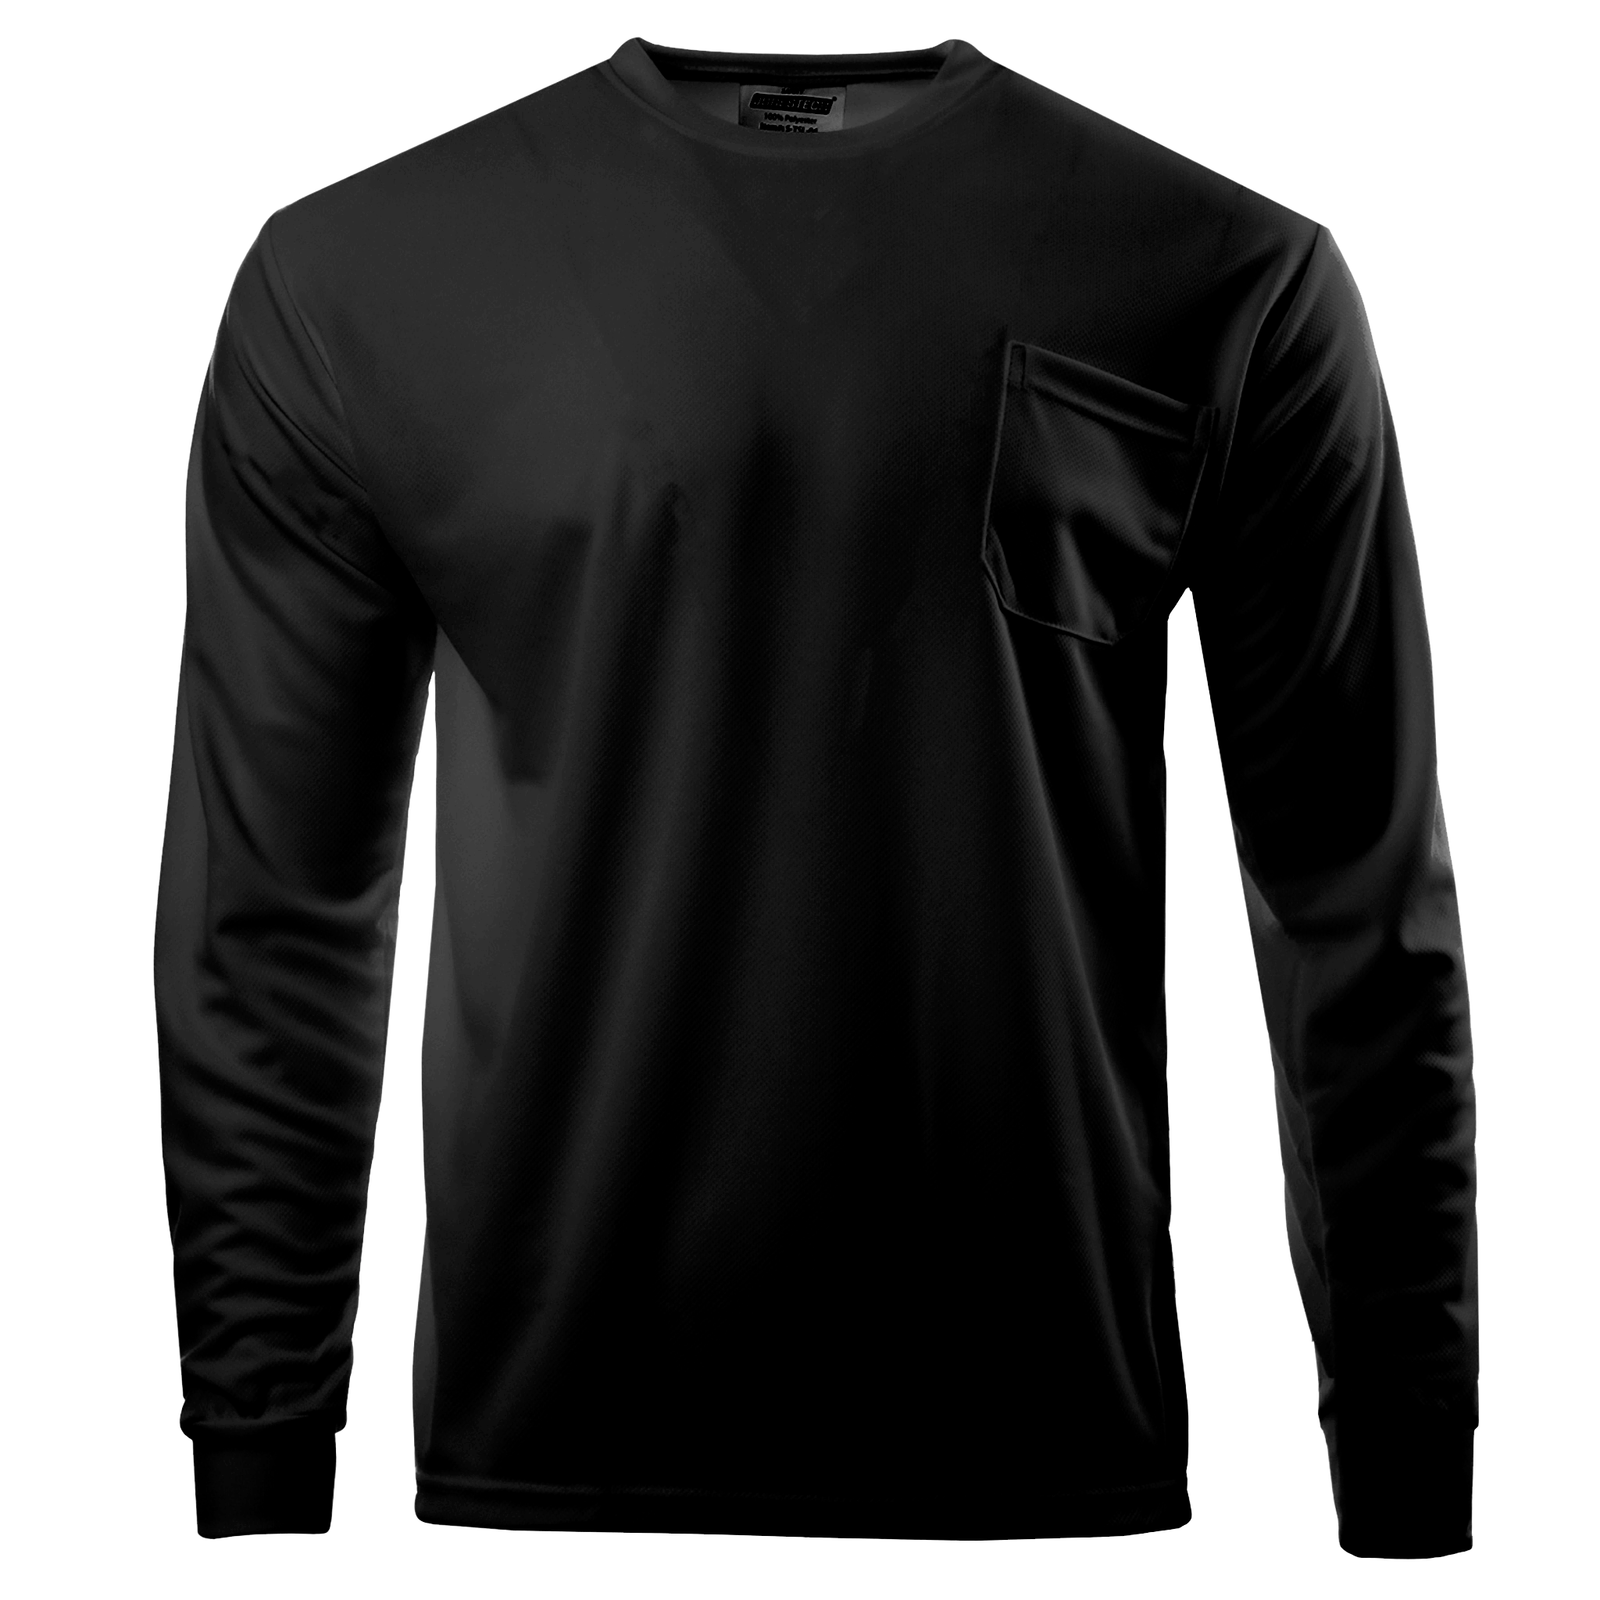 Corporation Safety – Wicking High Sweat & Long Sleeve | Shirt Breathable Technopack Visibility